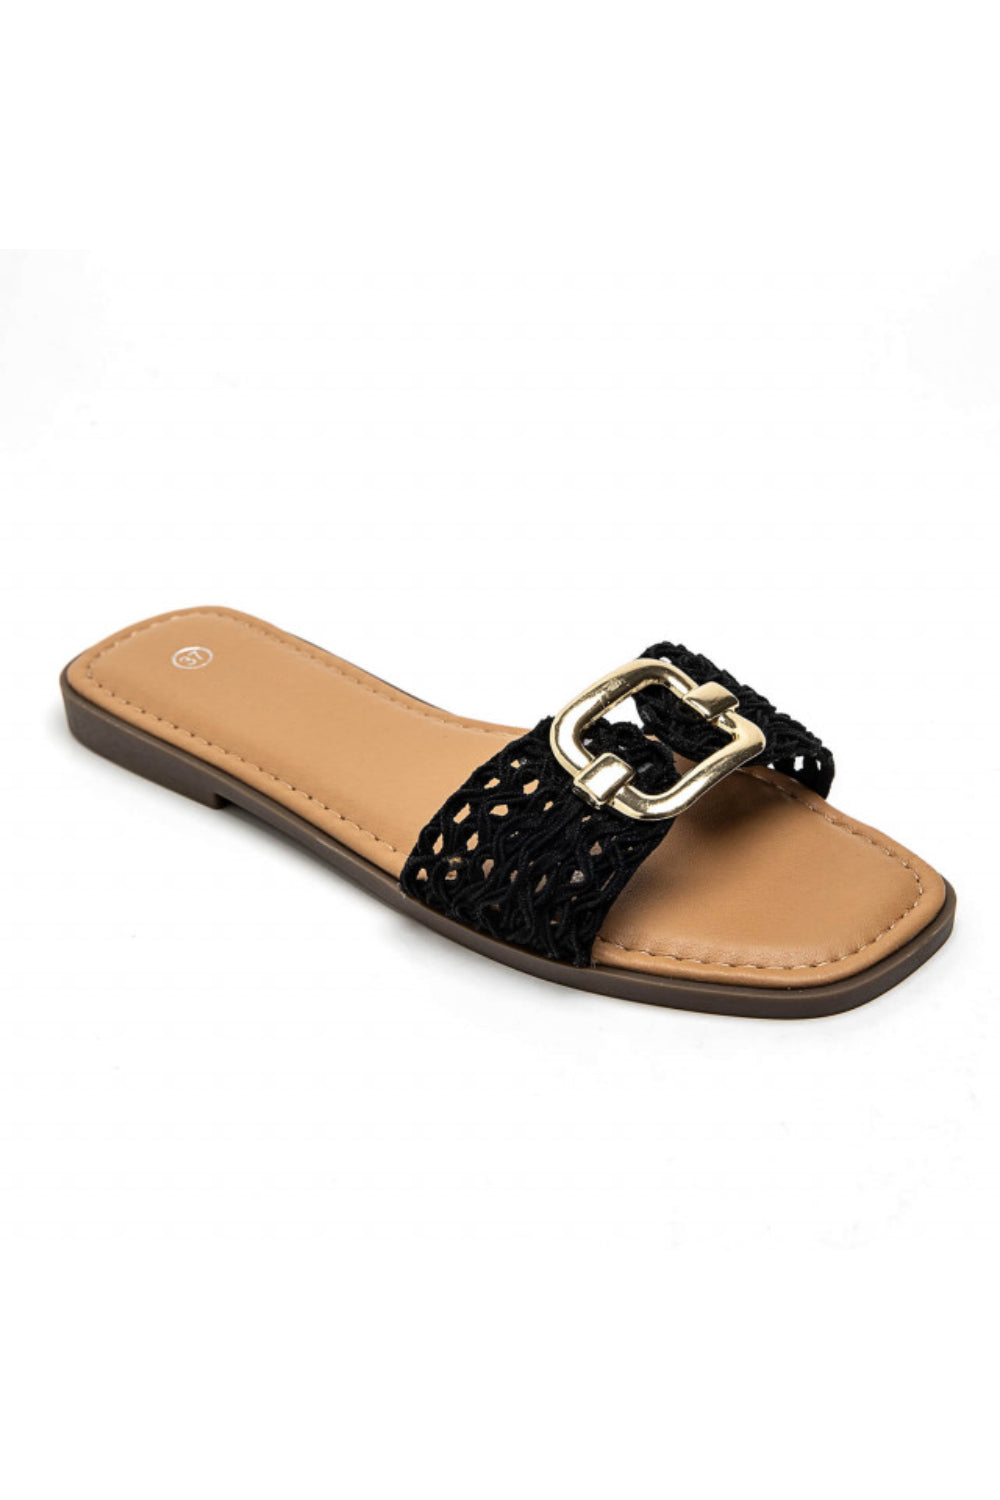 BLACK NETTED BUCKLE DETAIL FLAT SANDALS